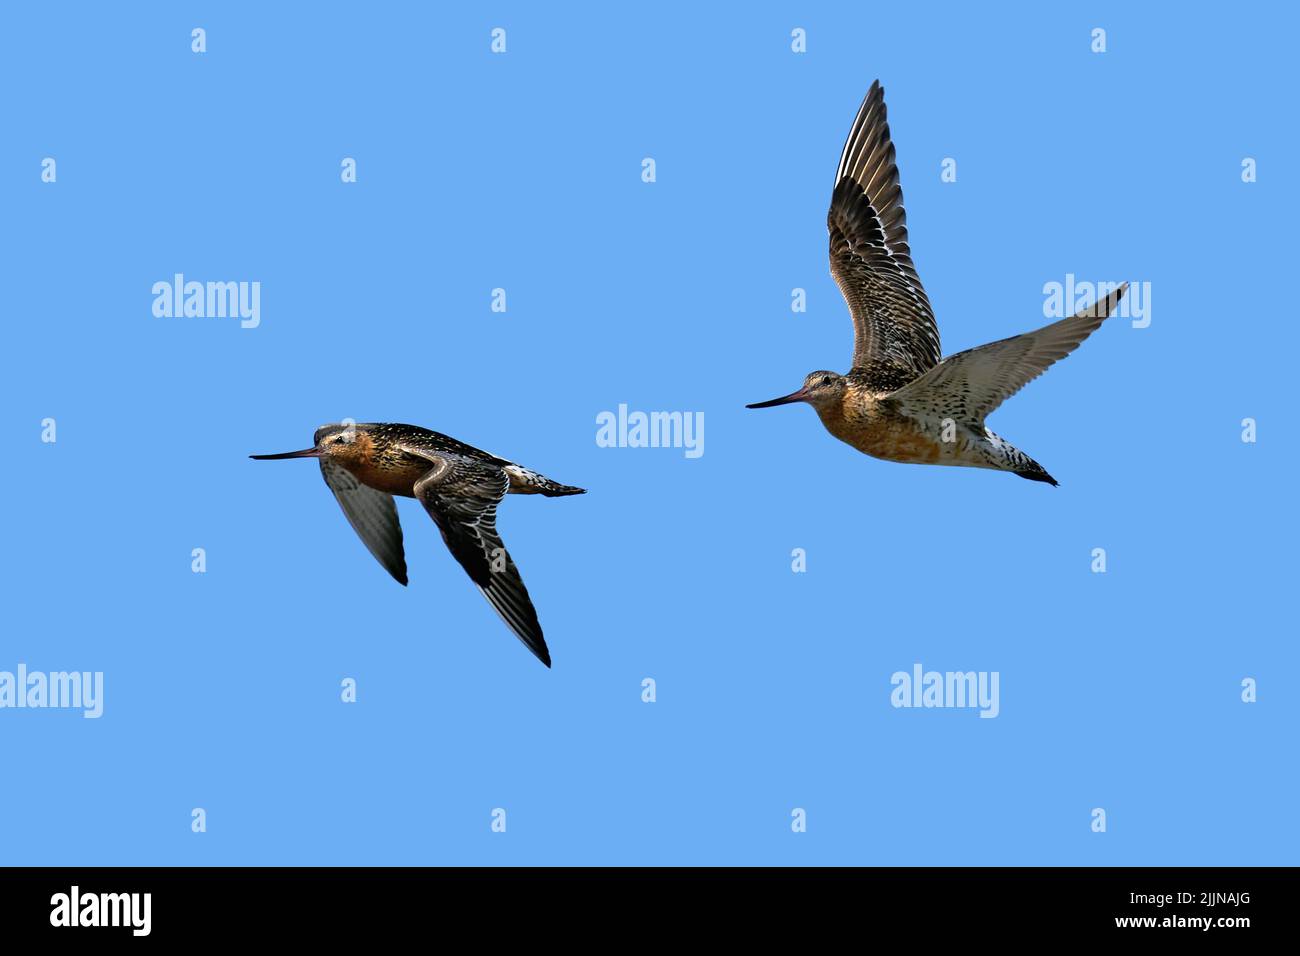 Bar-tailed godwits in flight in their natural enviroment in Denmark Stock Photo